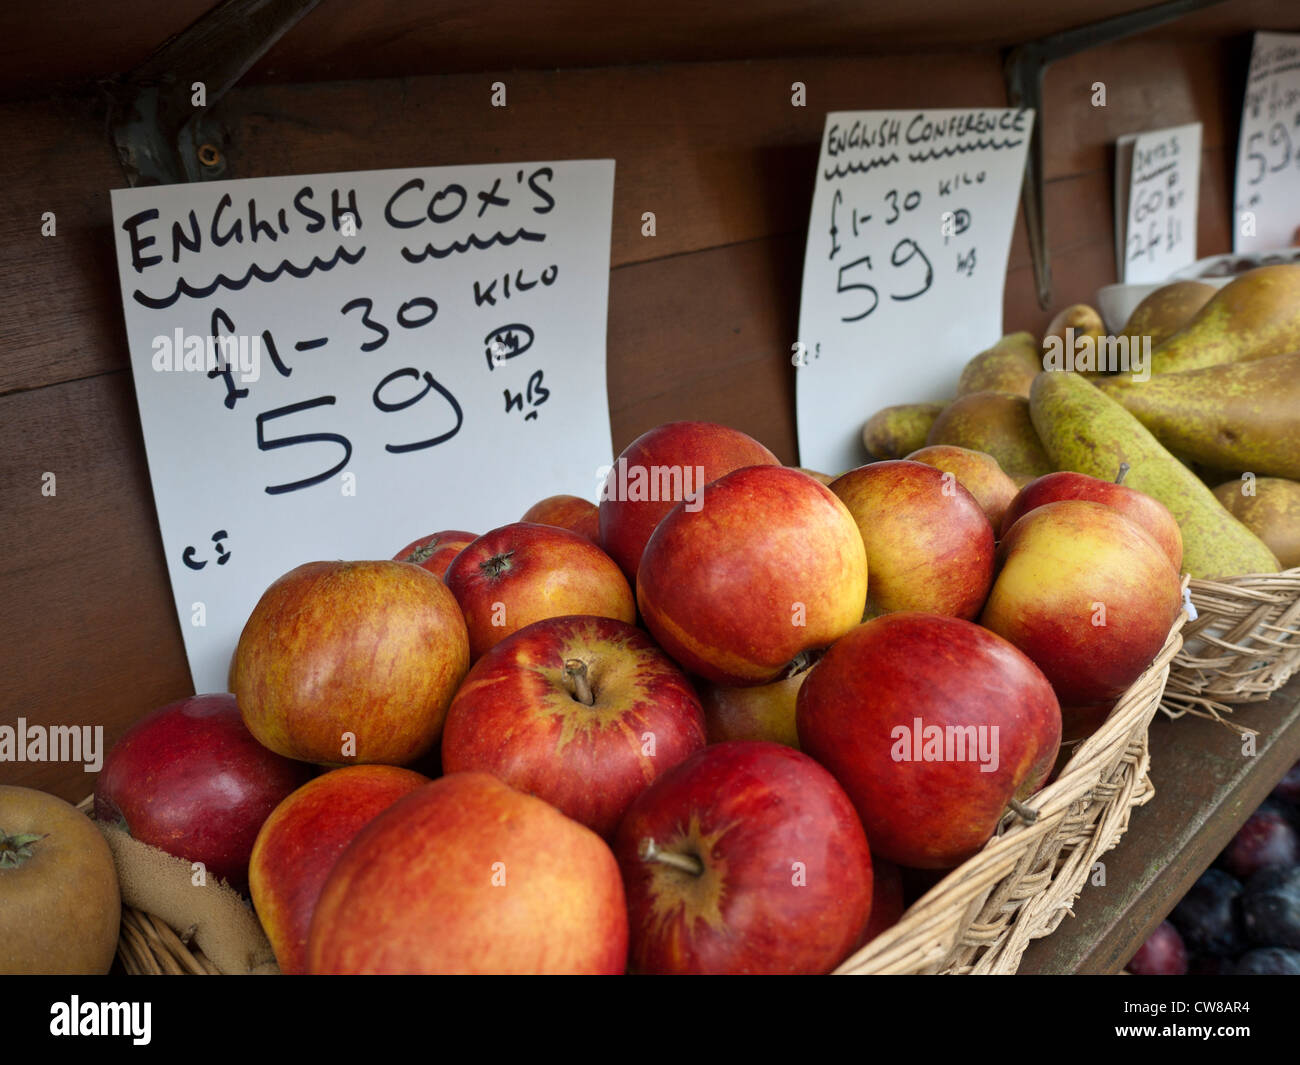 Village greengrocer display of local produce including English Cox's apples Stock Photo